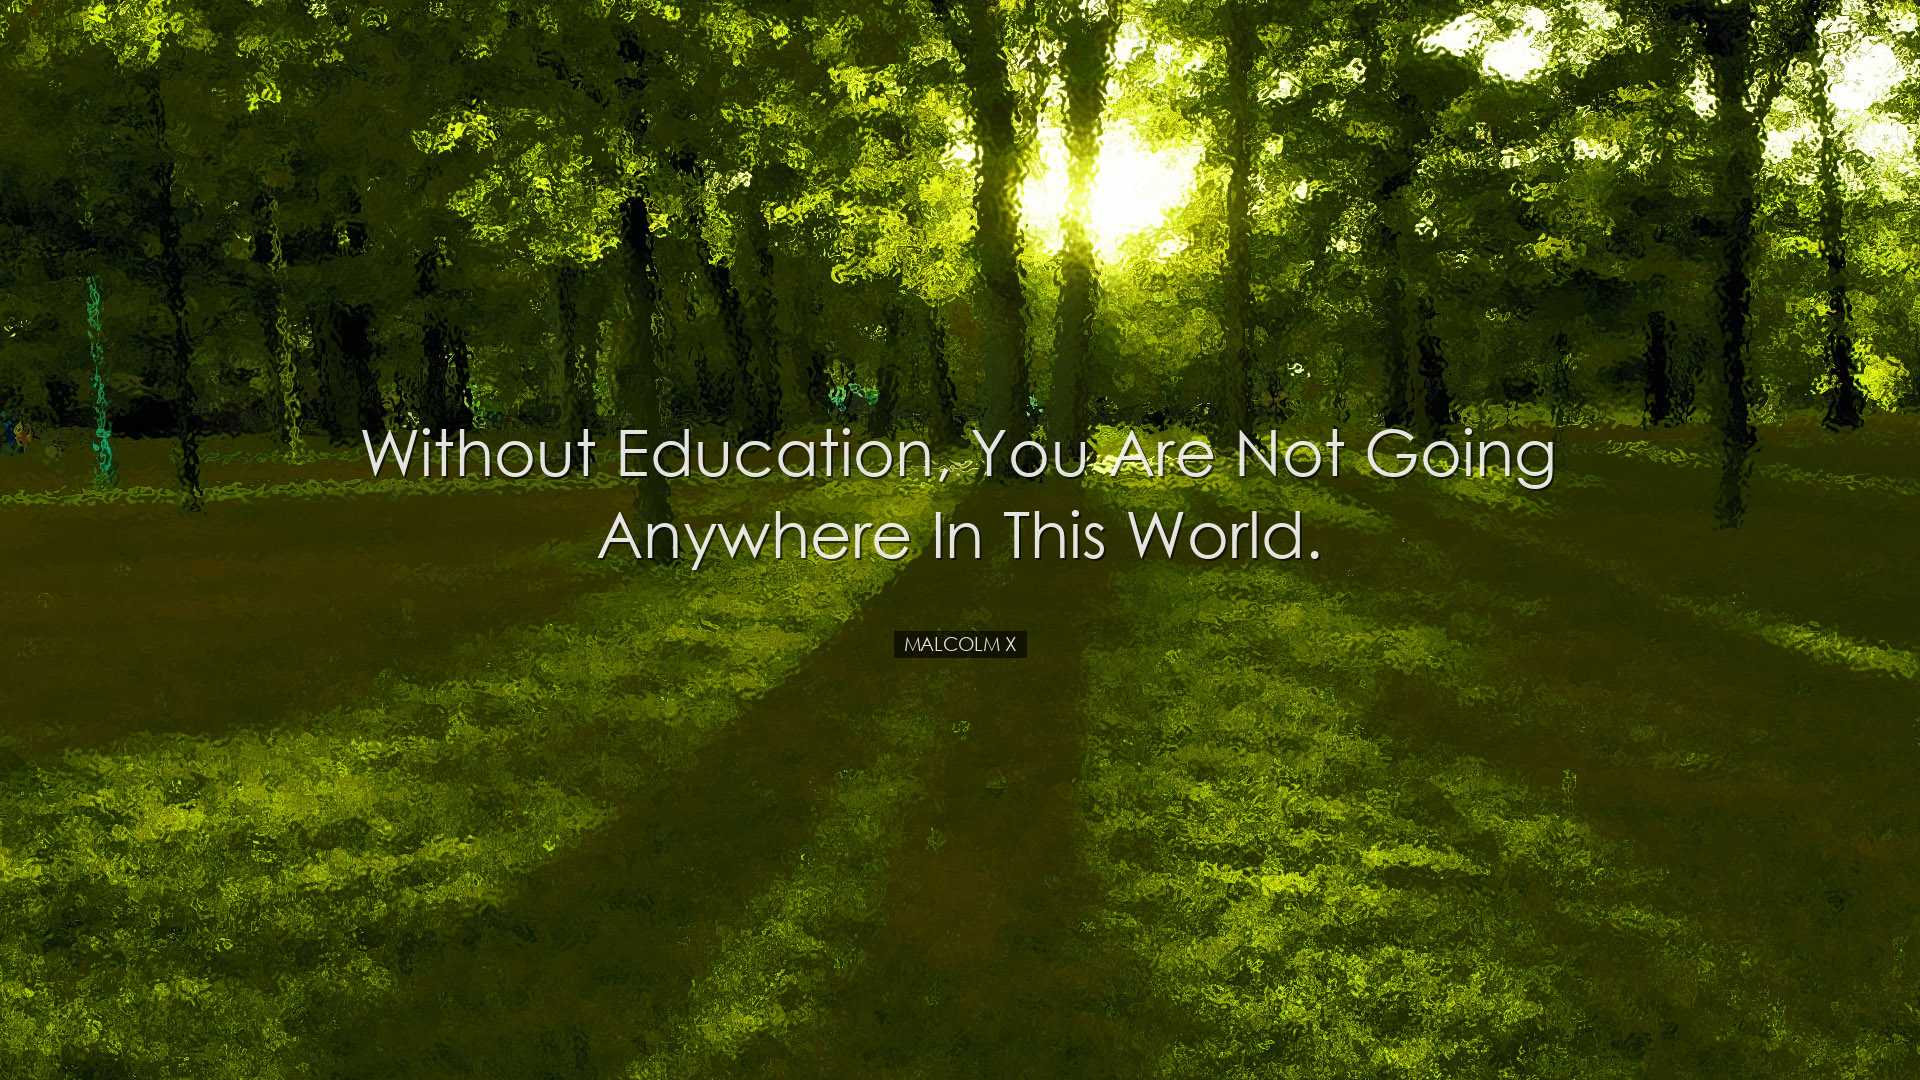 Without education, you are not going anywhere in this world. - Mal